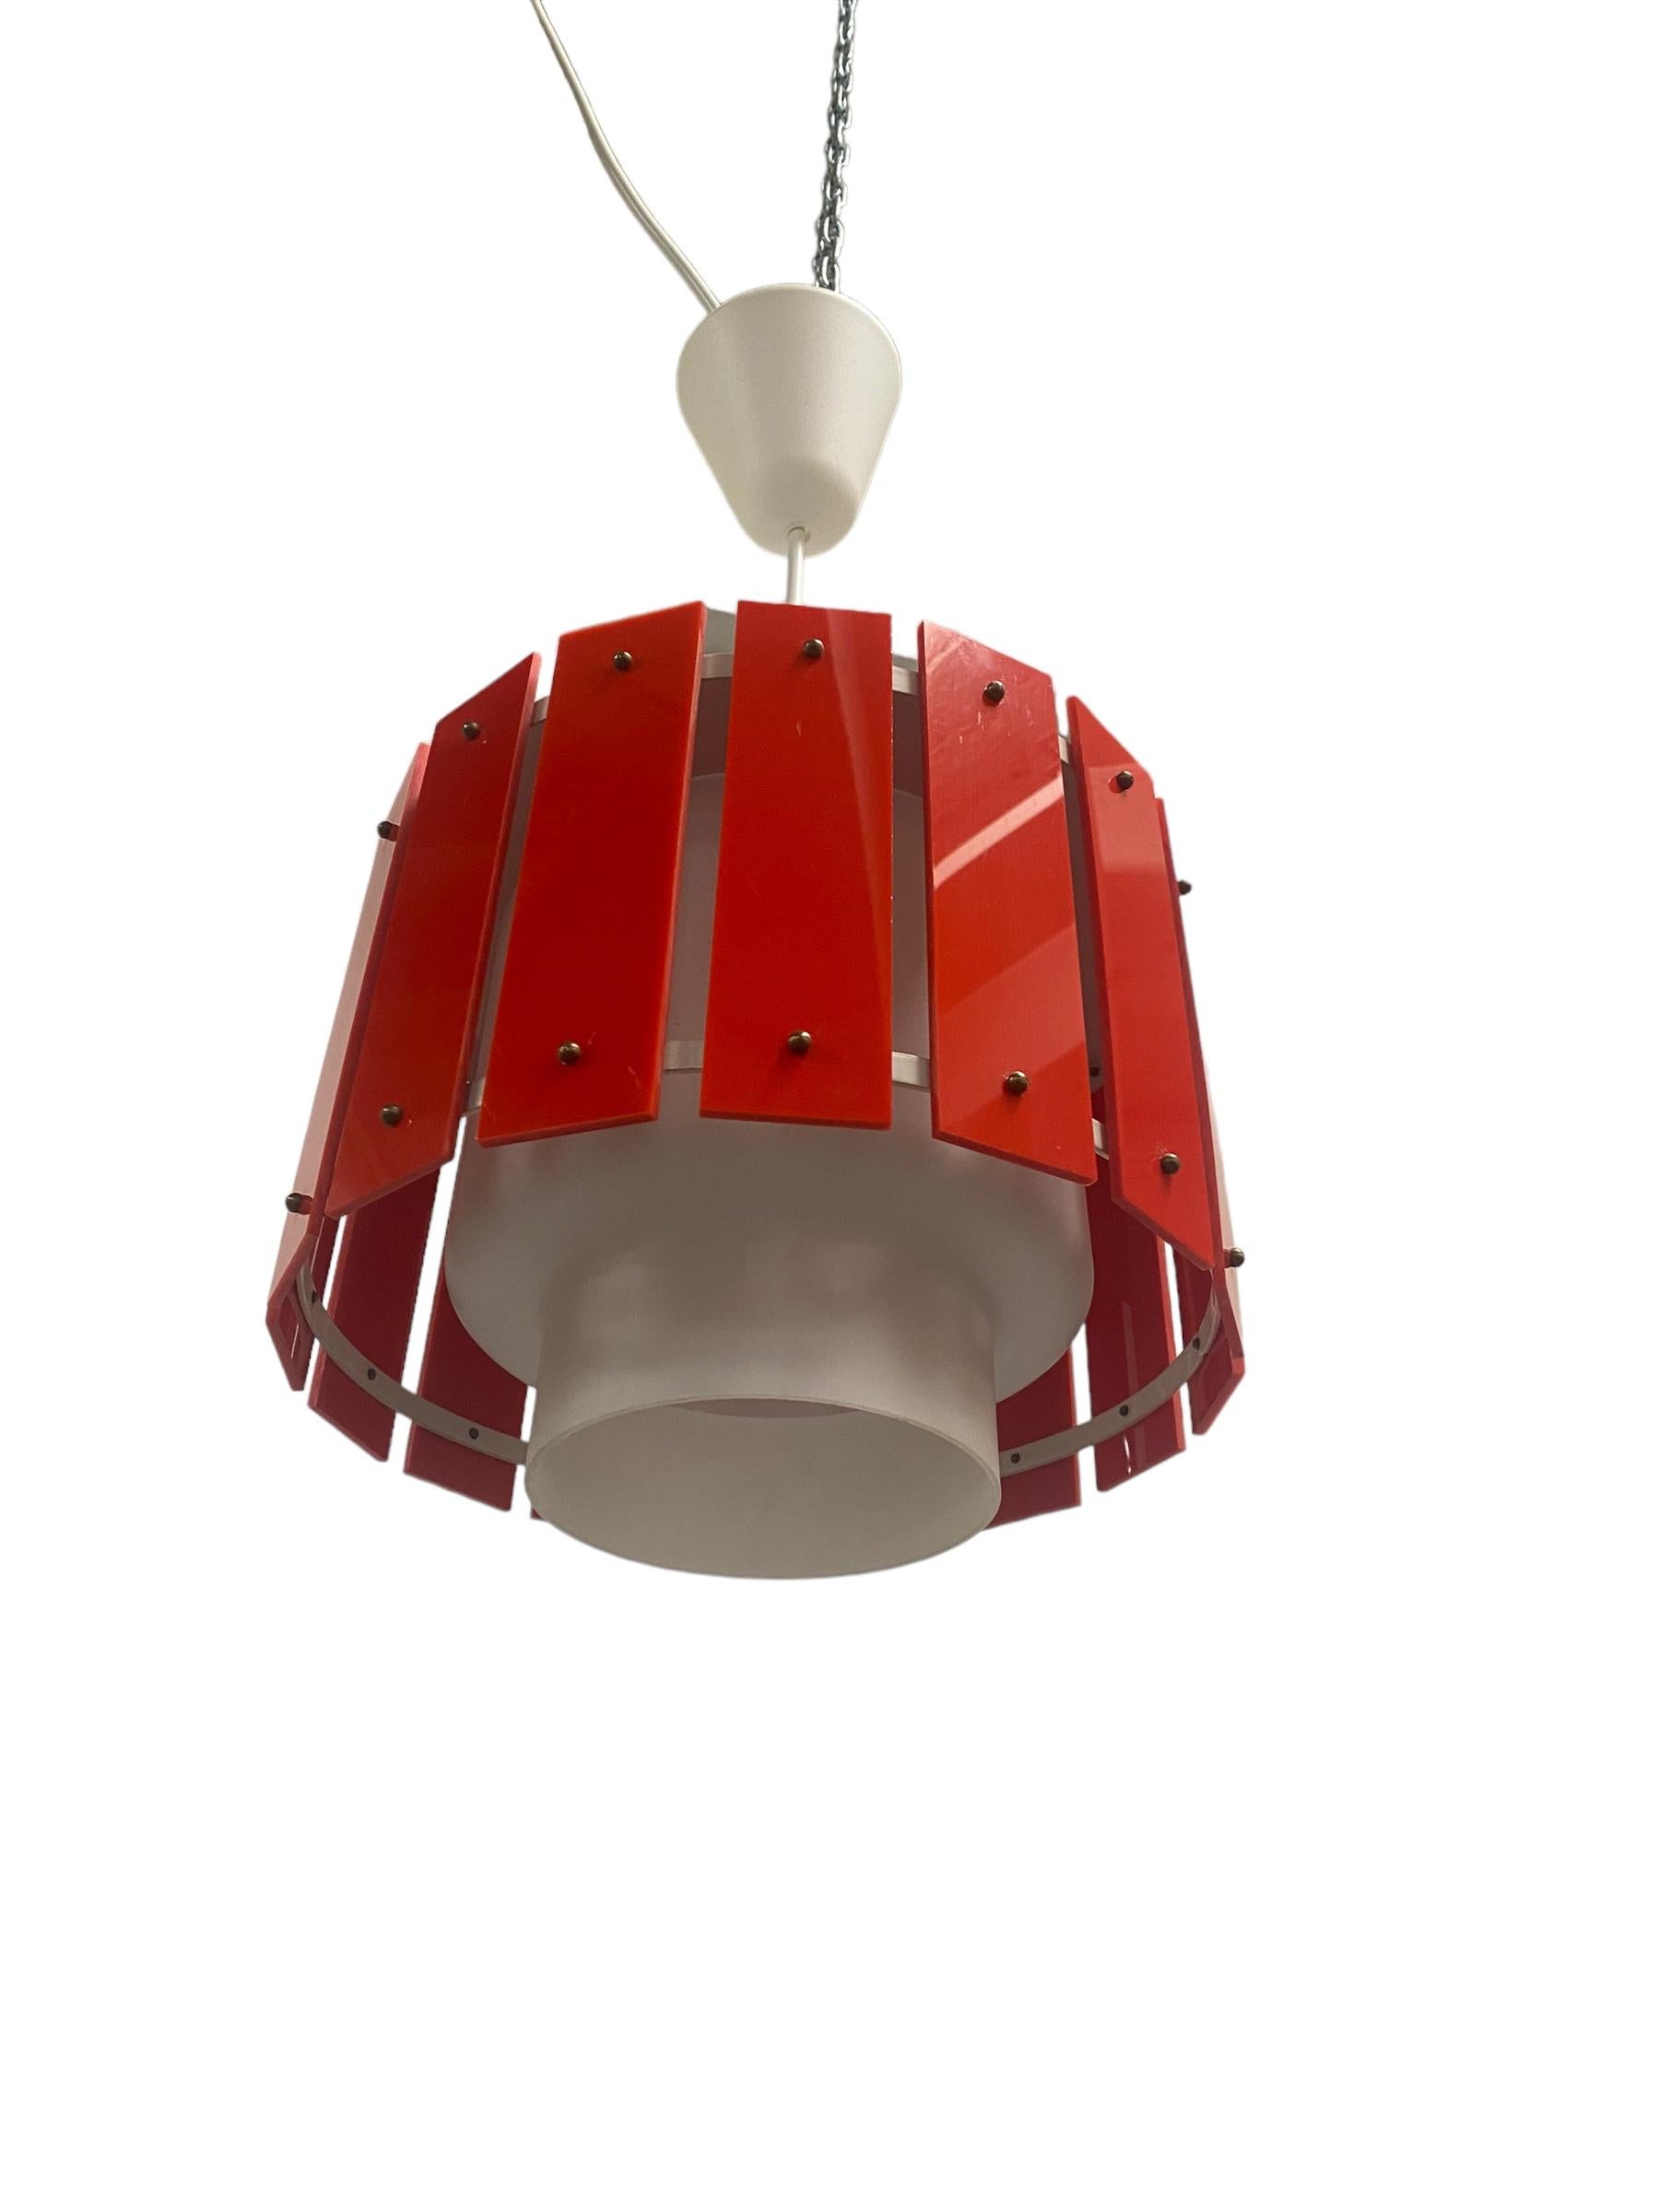 A Red Ceiling Pendant Model K2-47 by Maria Lindeman, 1960s For Sale 1